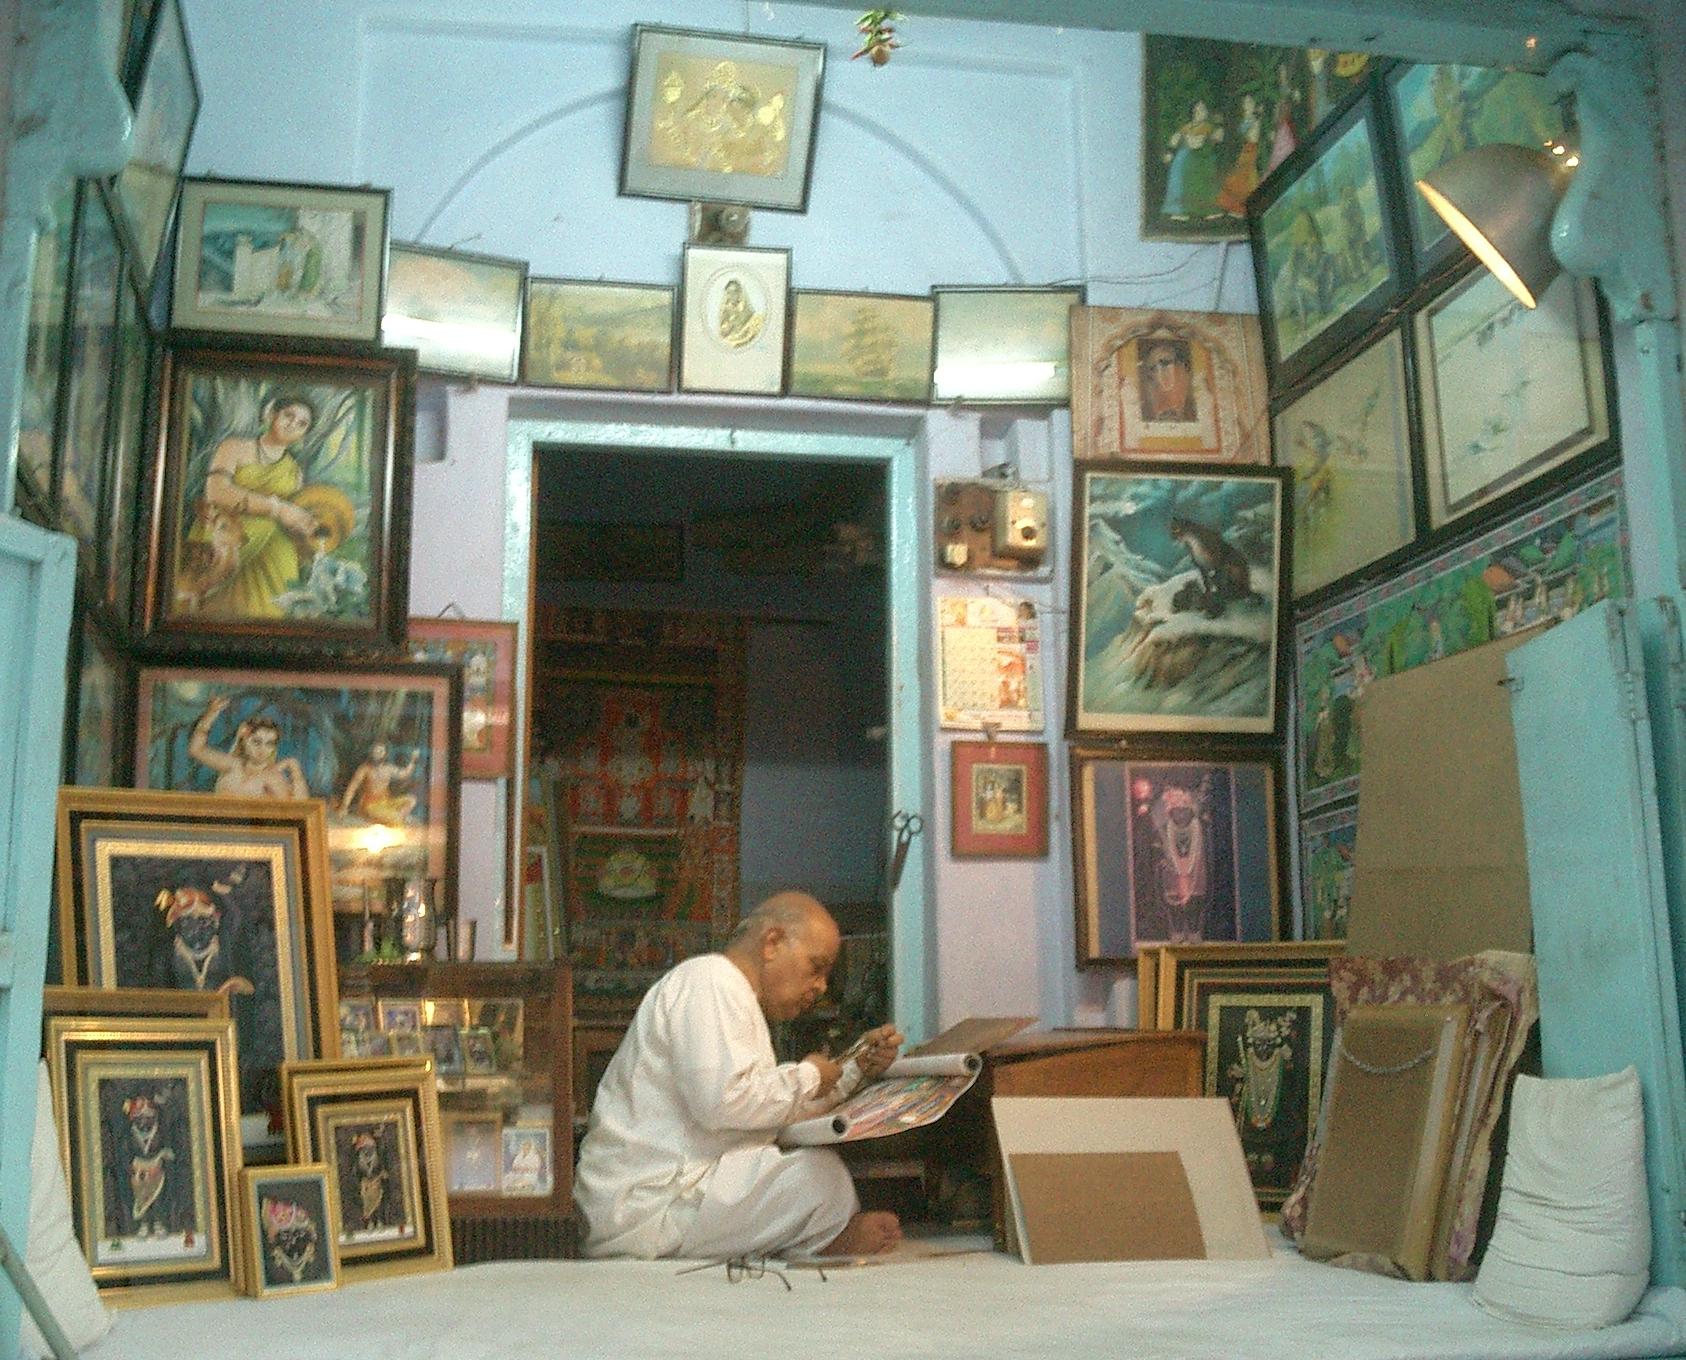 File:Painter at work, Nathdwara.jpg - a man sitting on a bed with a laptop